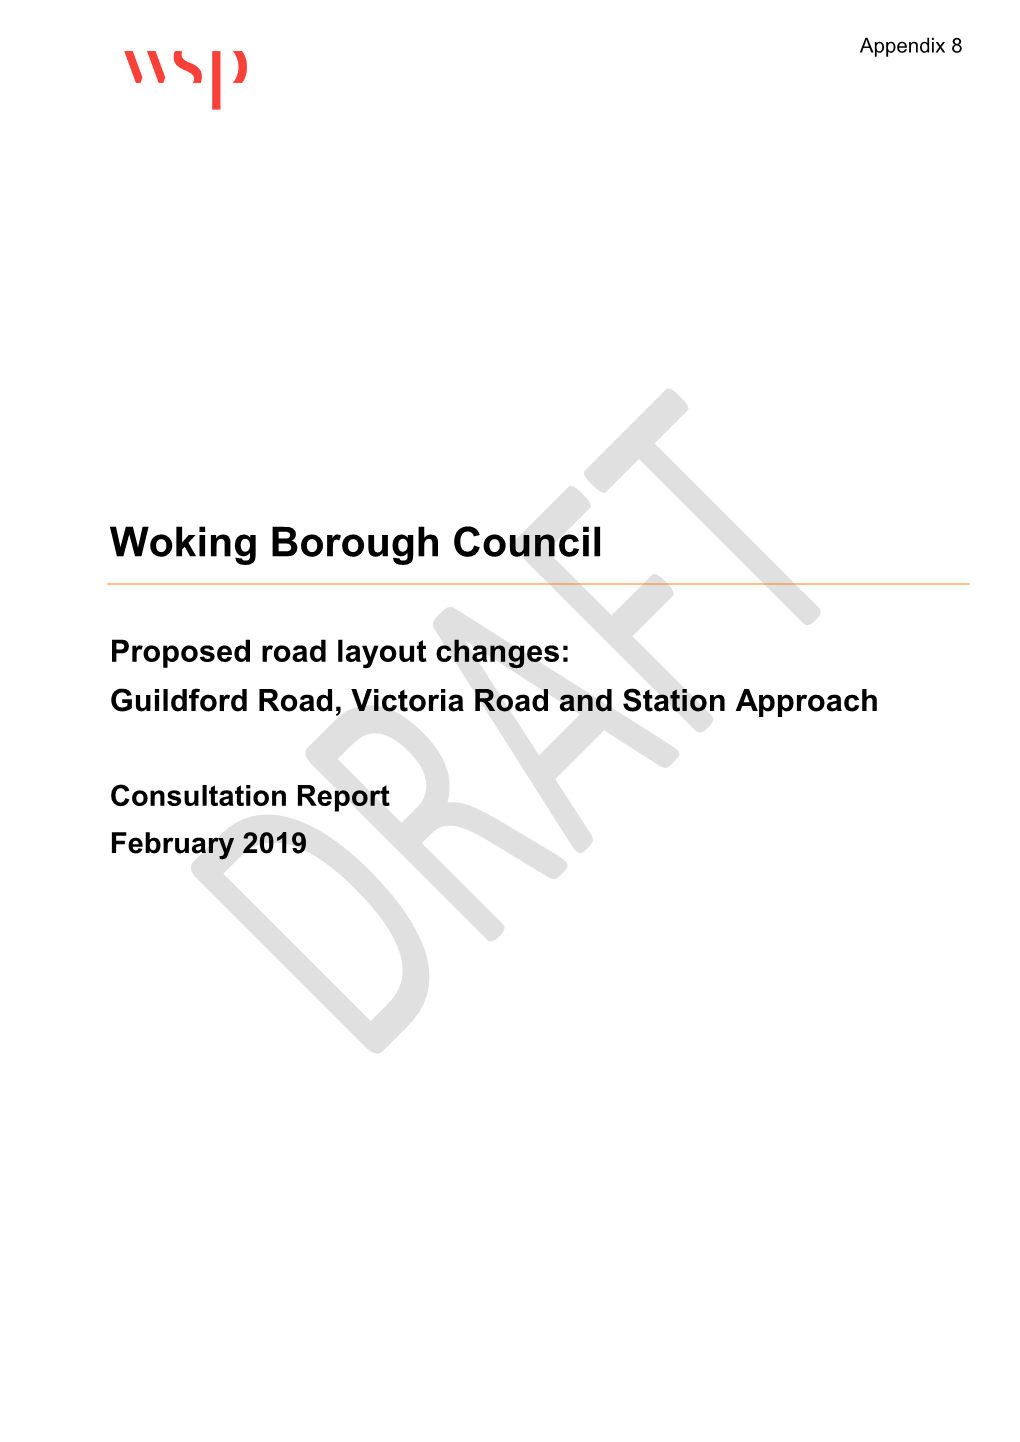 Woking Borough Council Proposed Road Layout Changes